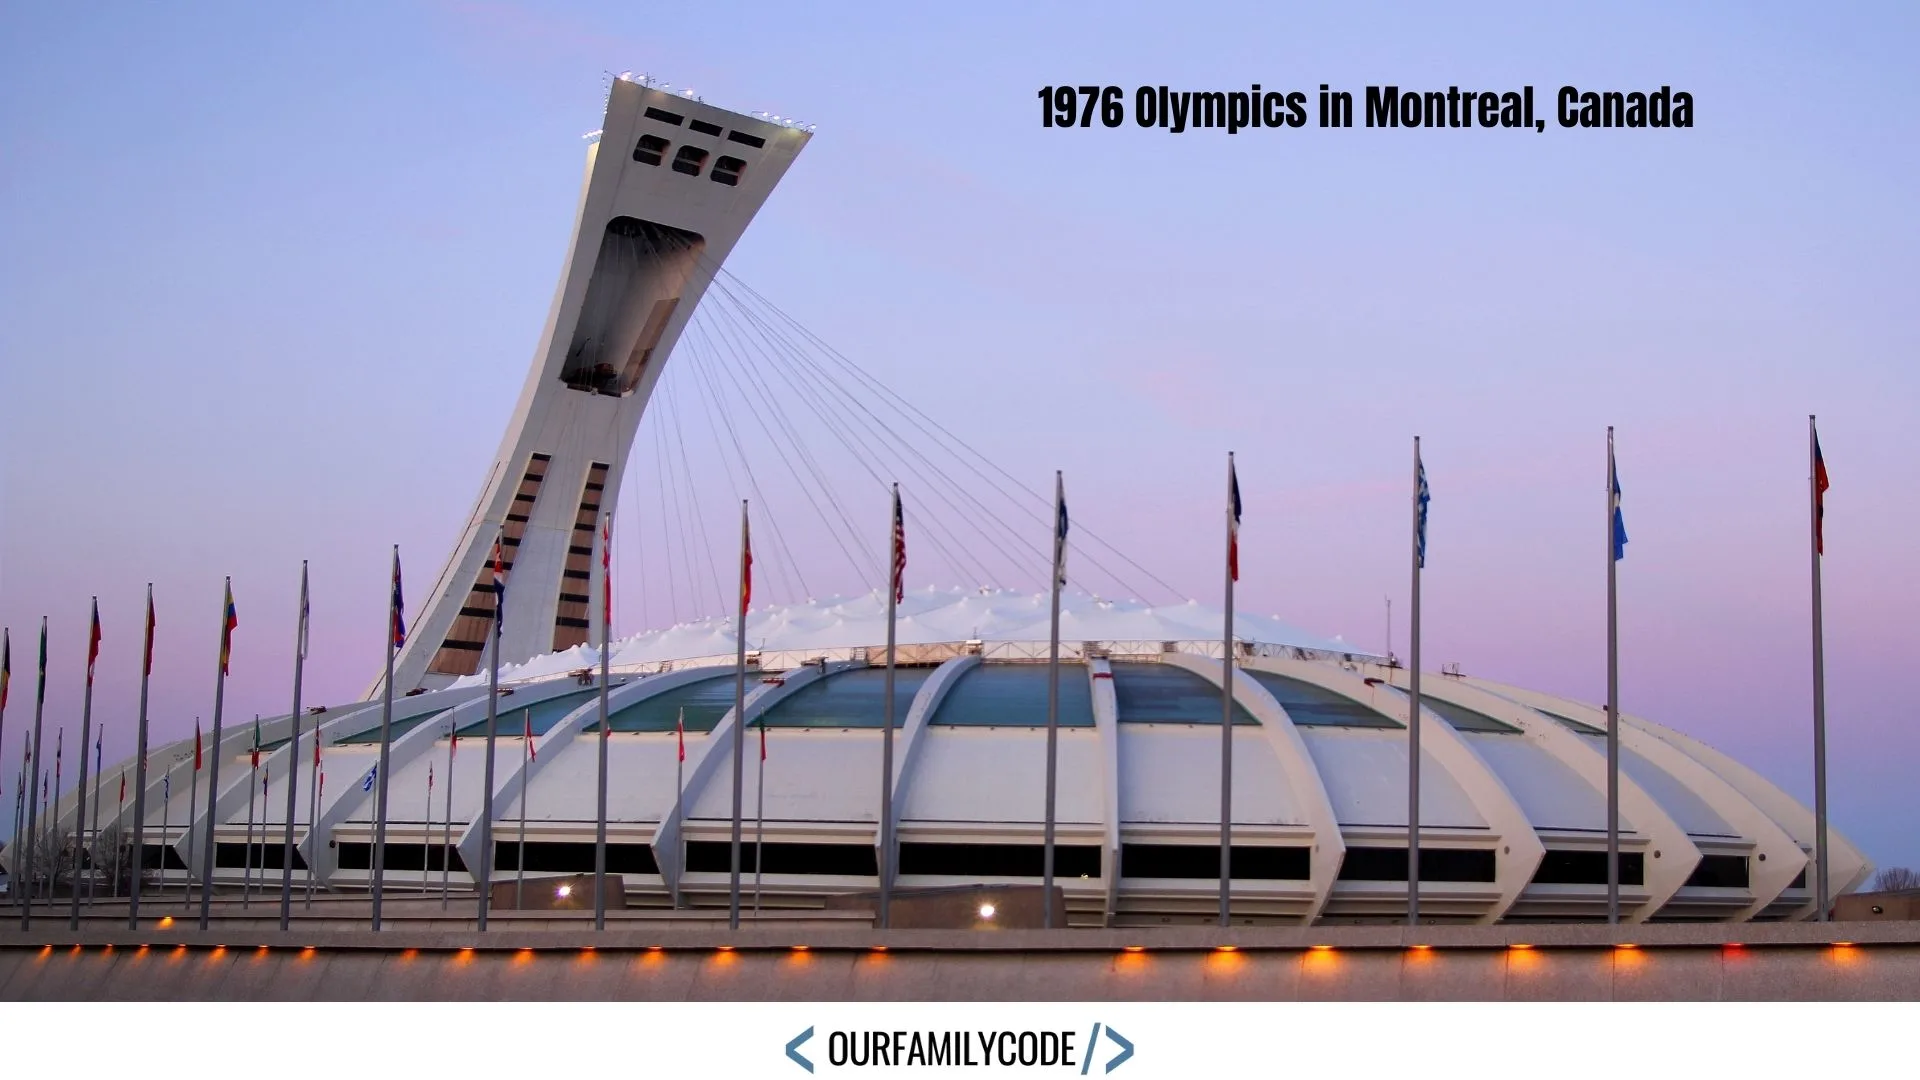 The 1976 Olympic Stadium was designed by French architect Roger Taillibert and is often nicknamed "The Big O" because of its name and the doughnut-shape of the stadium's roof.